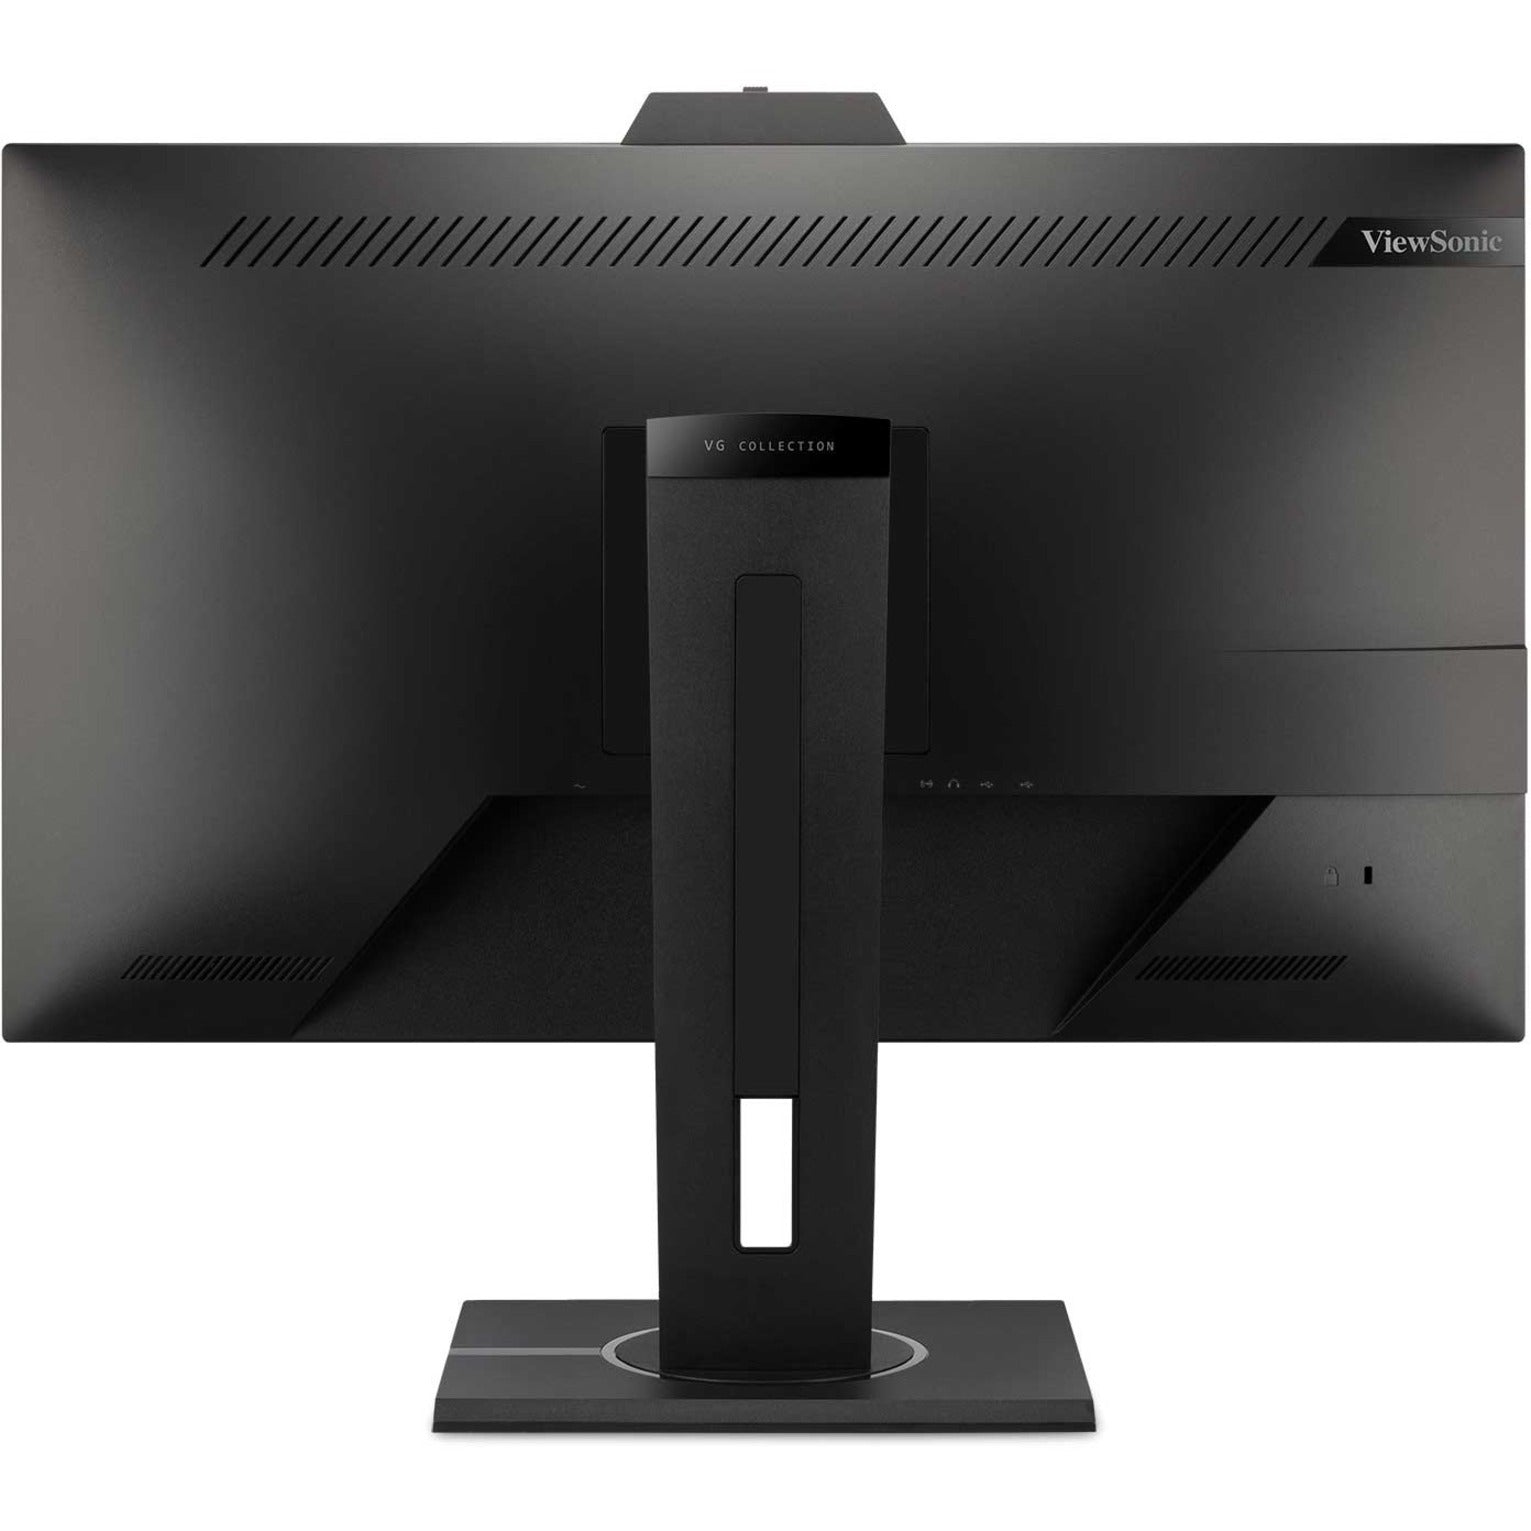 ViewSonic VG2740V 27" IPS Full HD Video Conferencing Monitor, SuperClear IPS, Built-in Webcam, Microphone, USB Hub, HDMI, DisplayPort